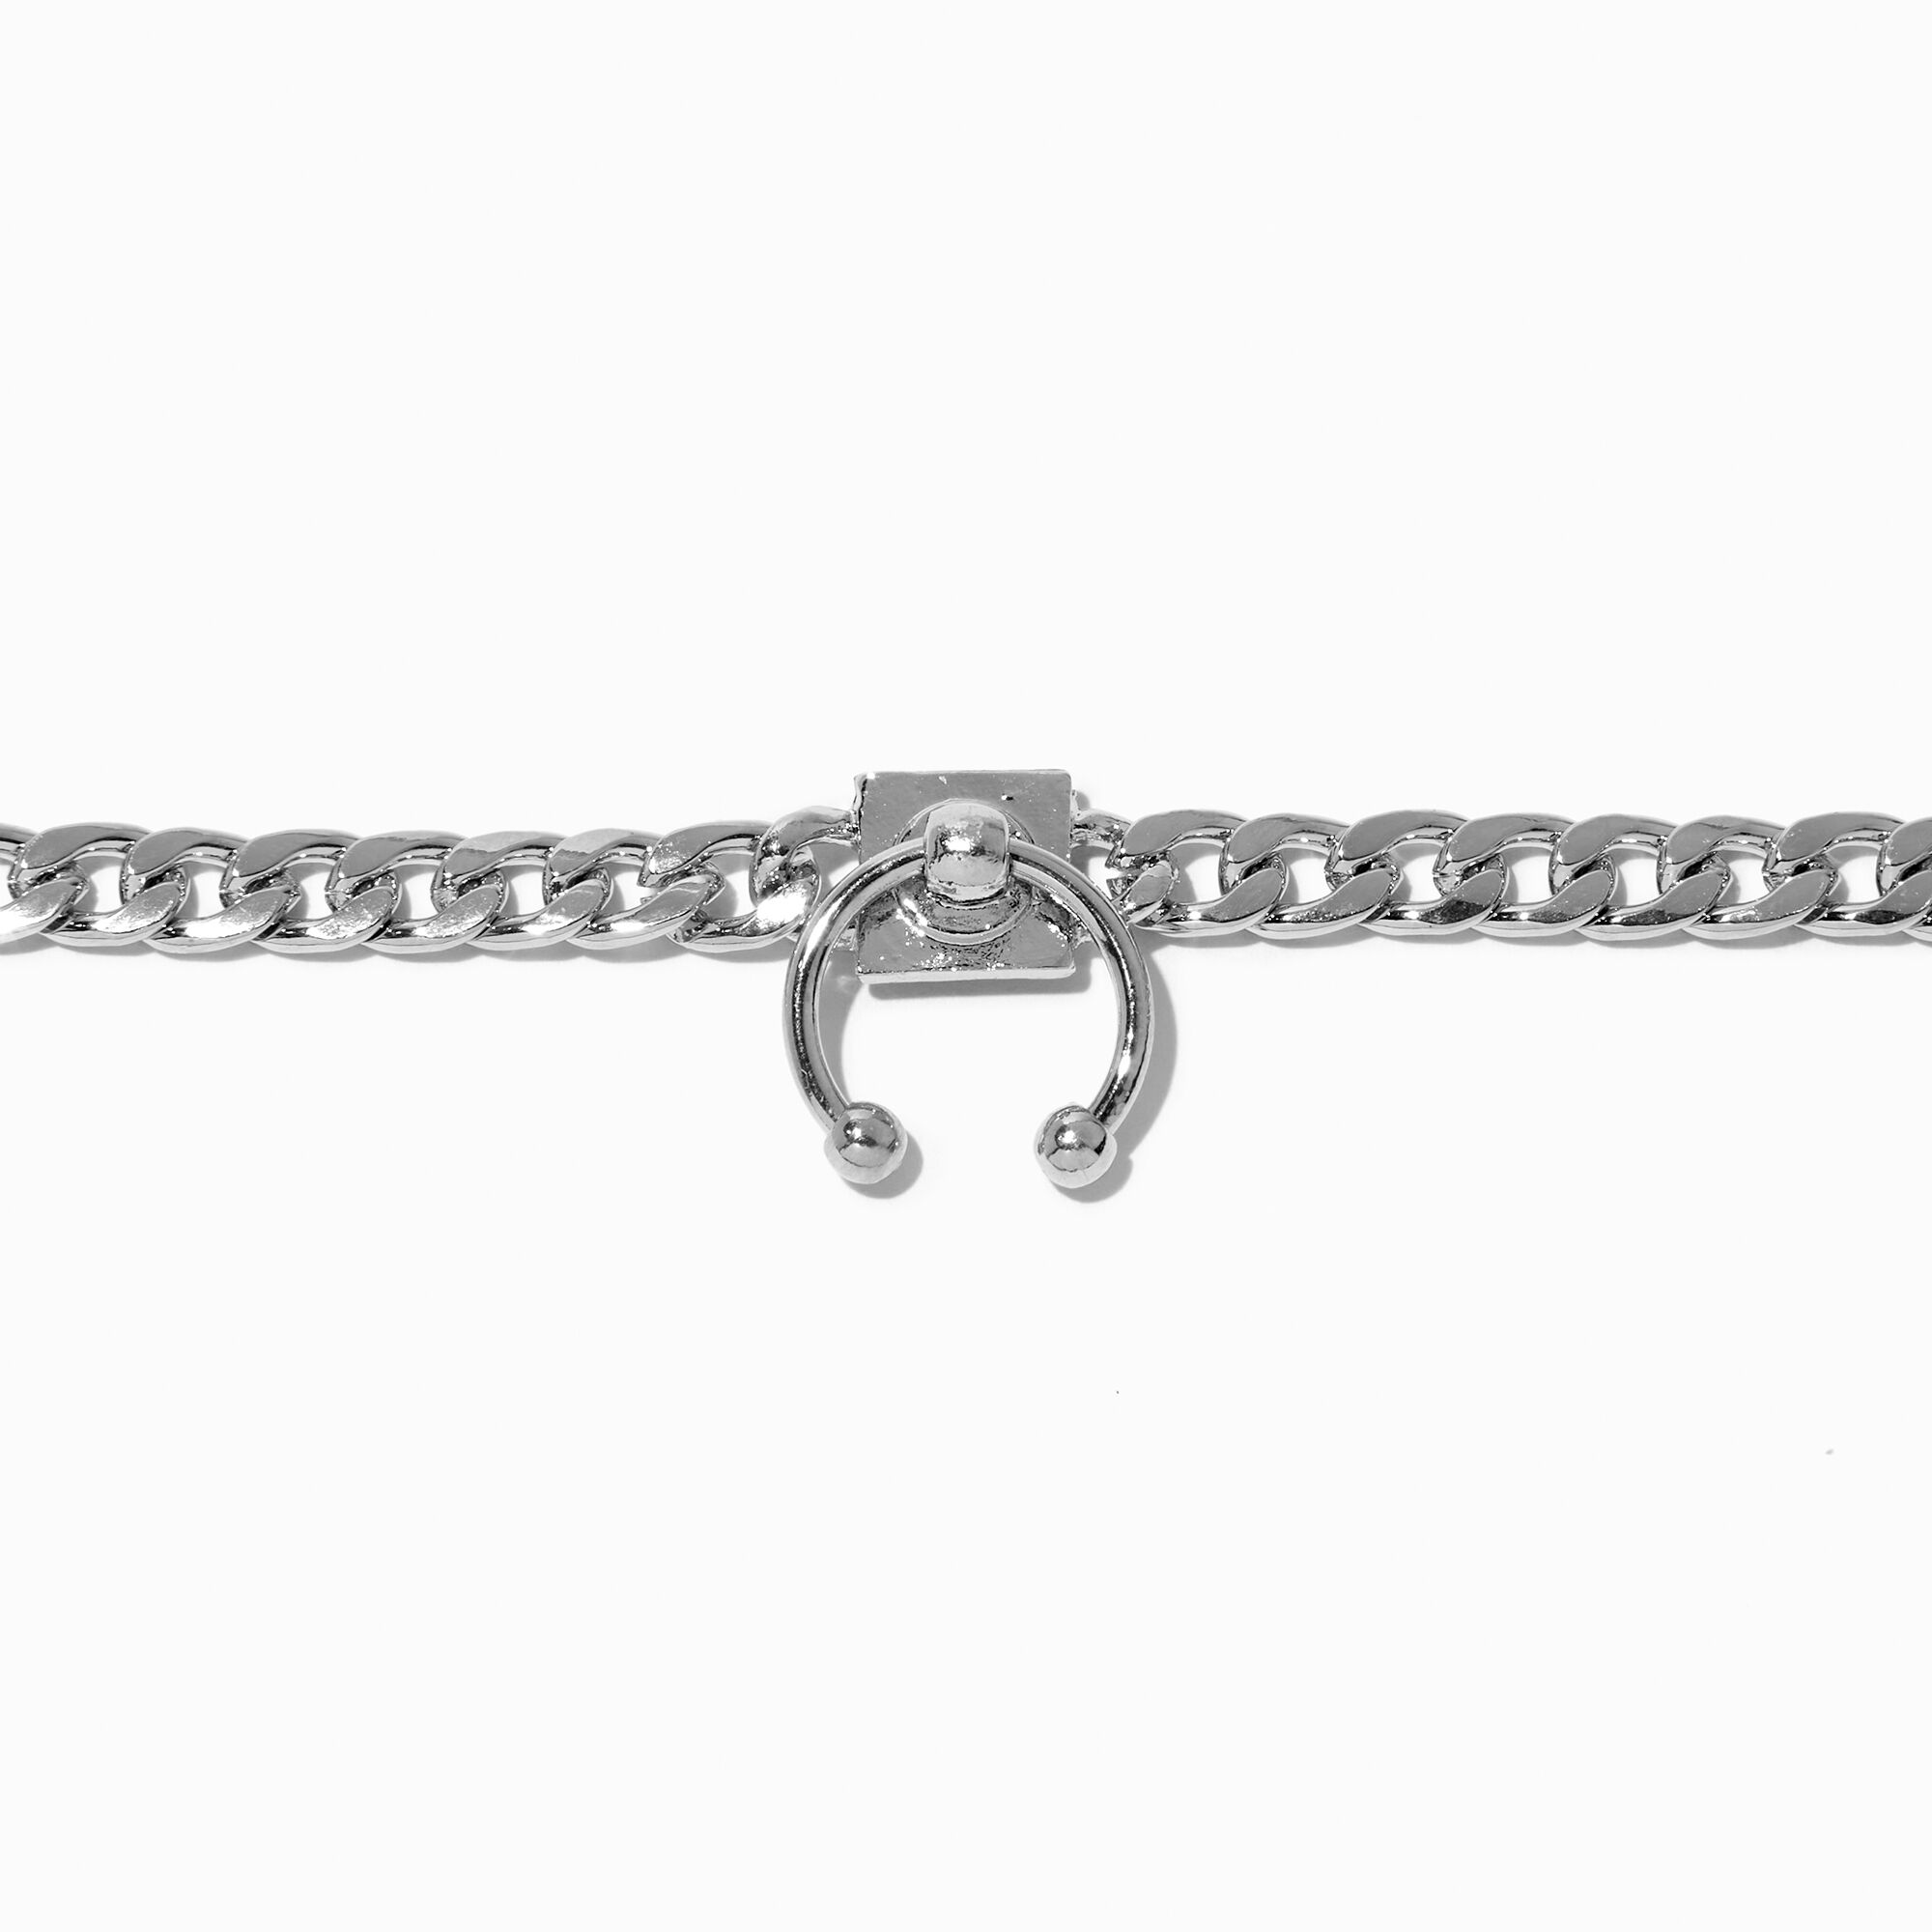 View Claires Tone Bull Ring Curb Chain Choker Necklace Silver information